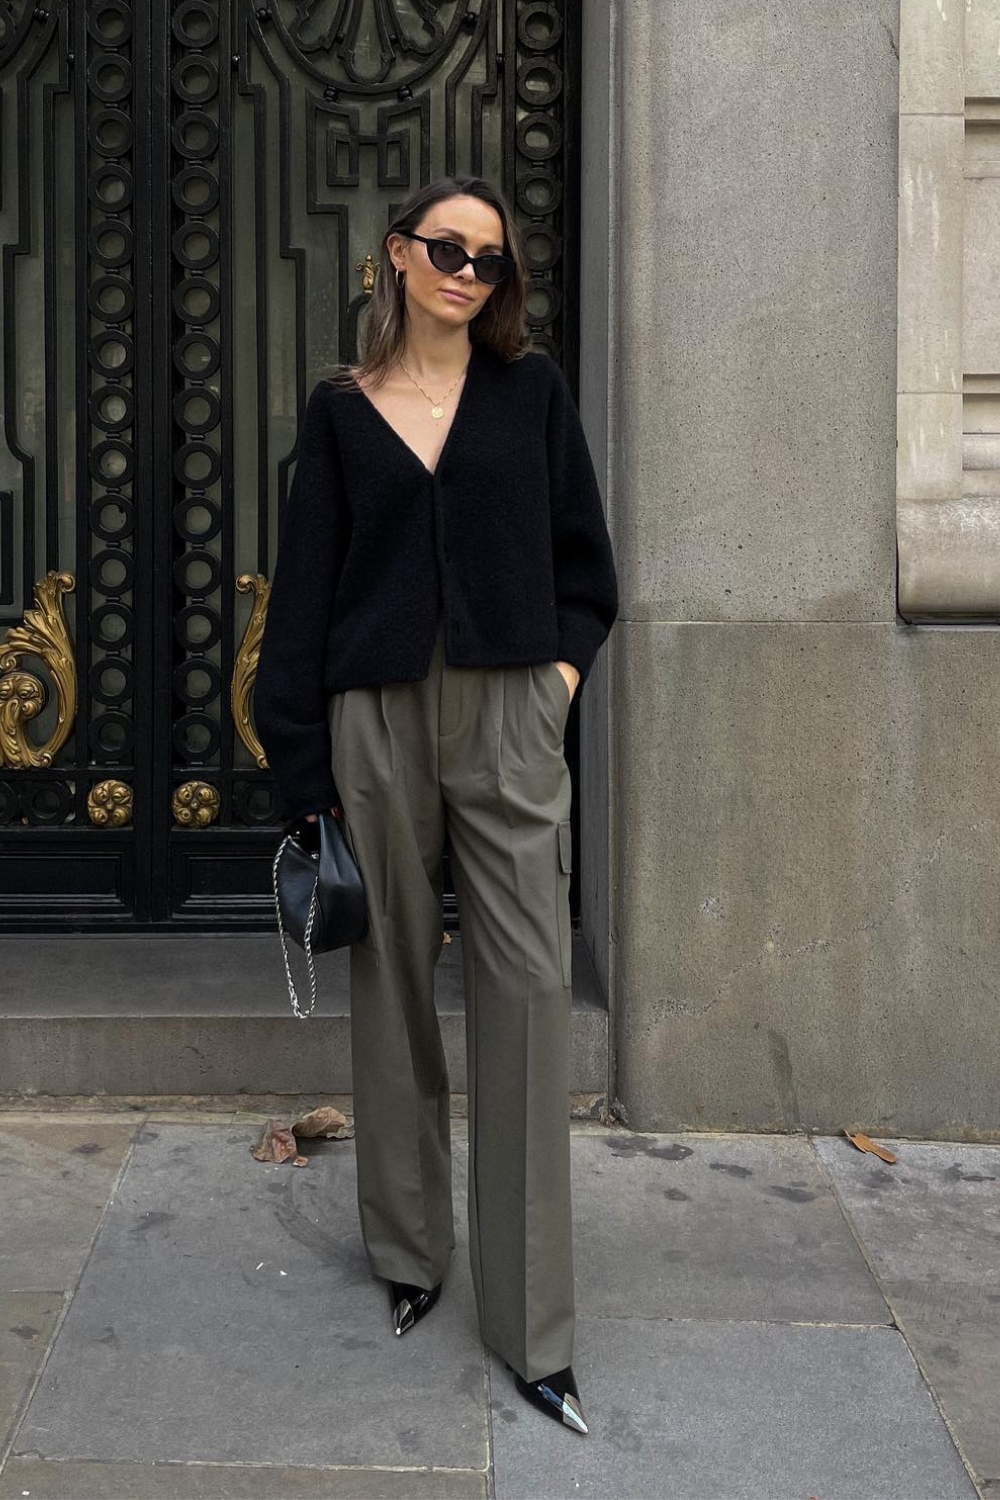 Casual Spring Outfit Ideas - Cargo pants and cardigan